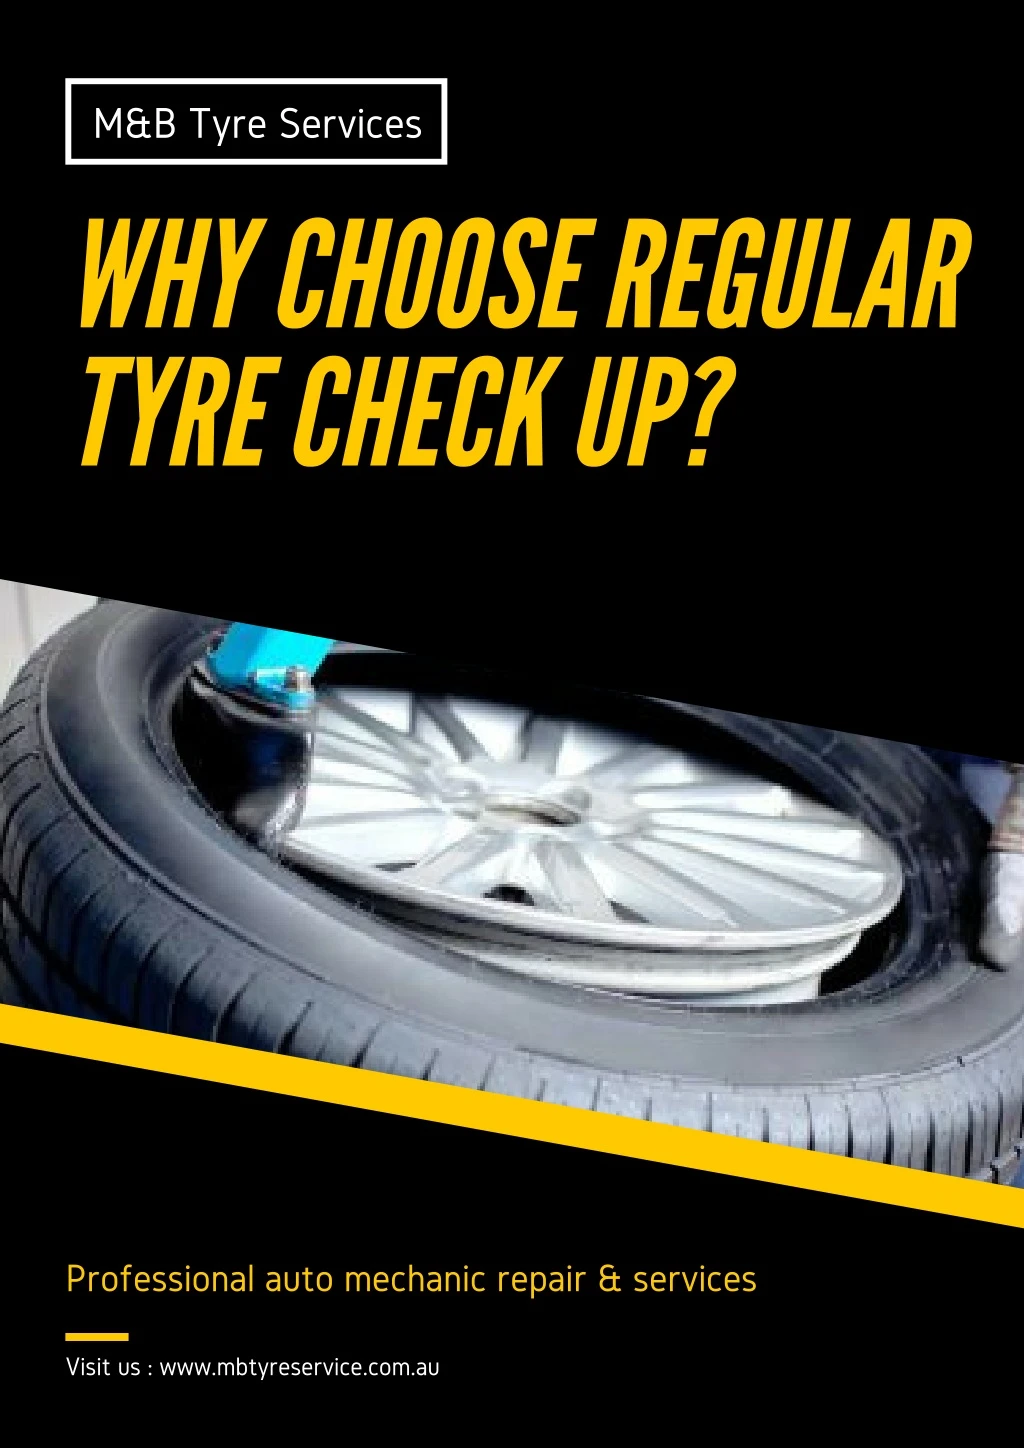 m b tyre services why choose regular tyre check up